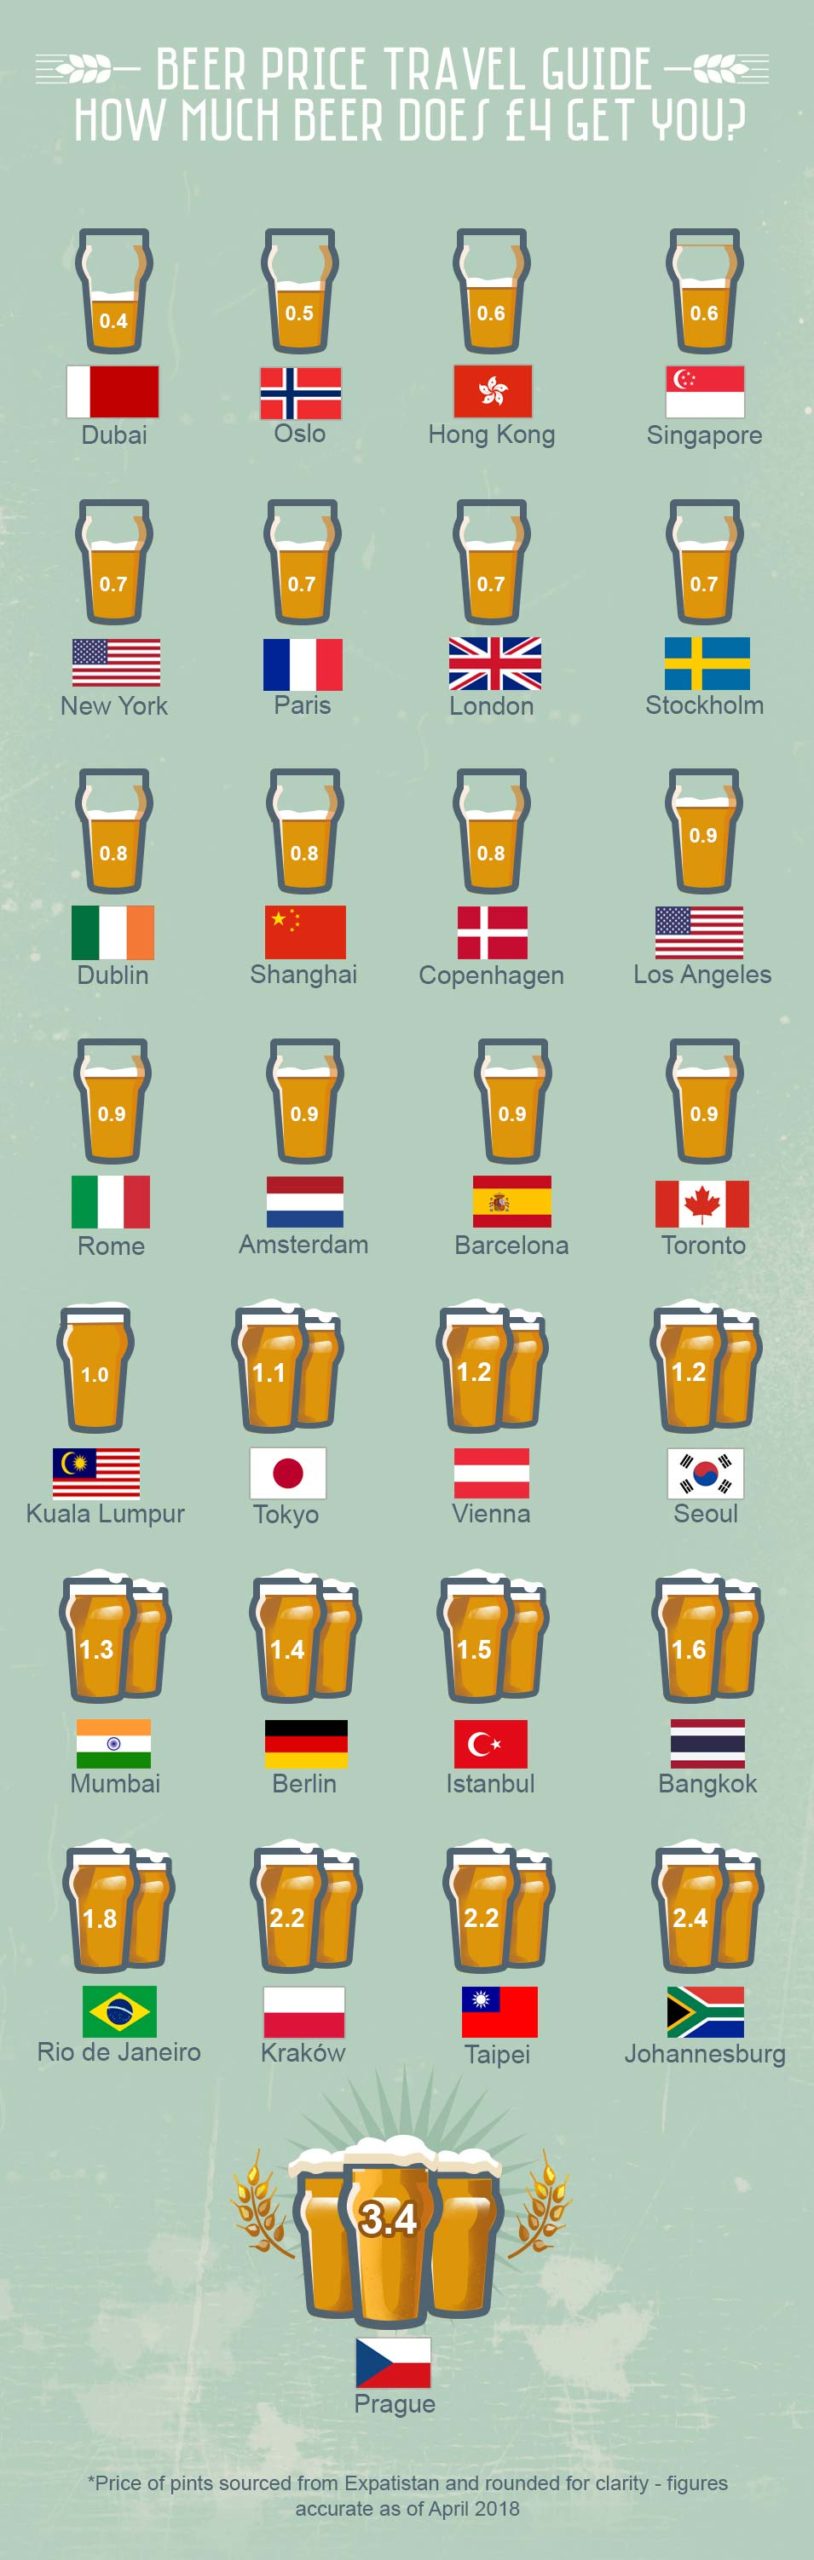 Beer Price Travel Guide 2018